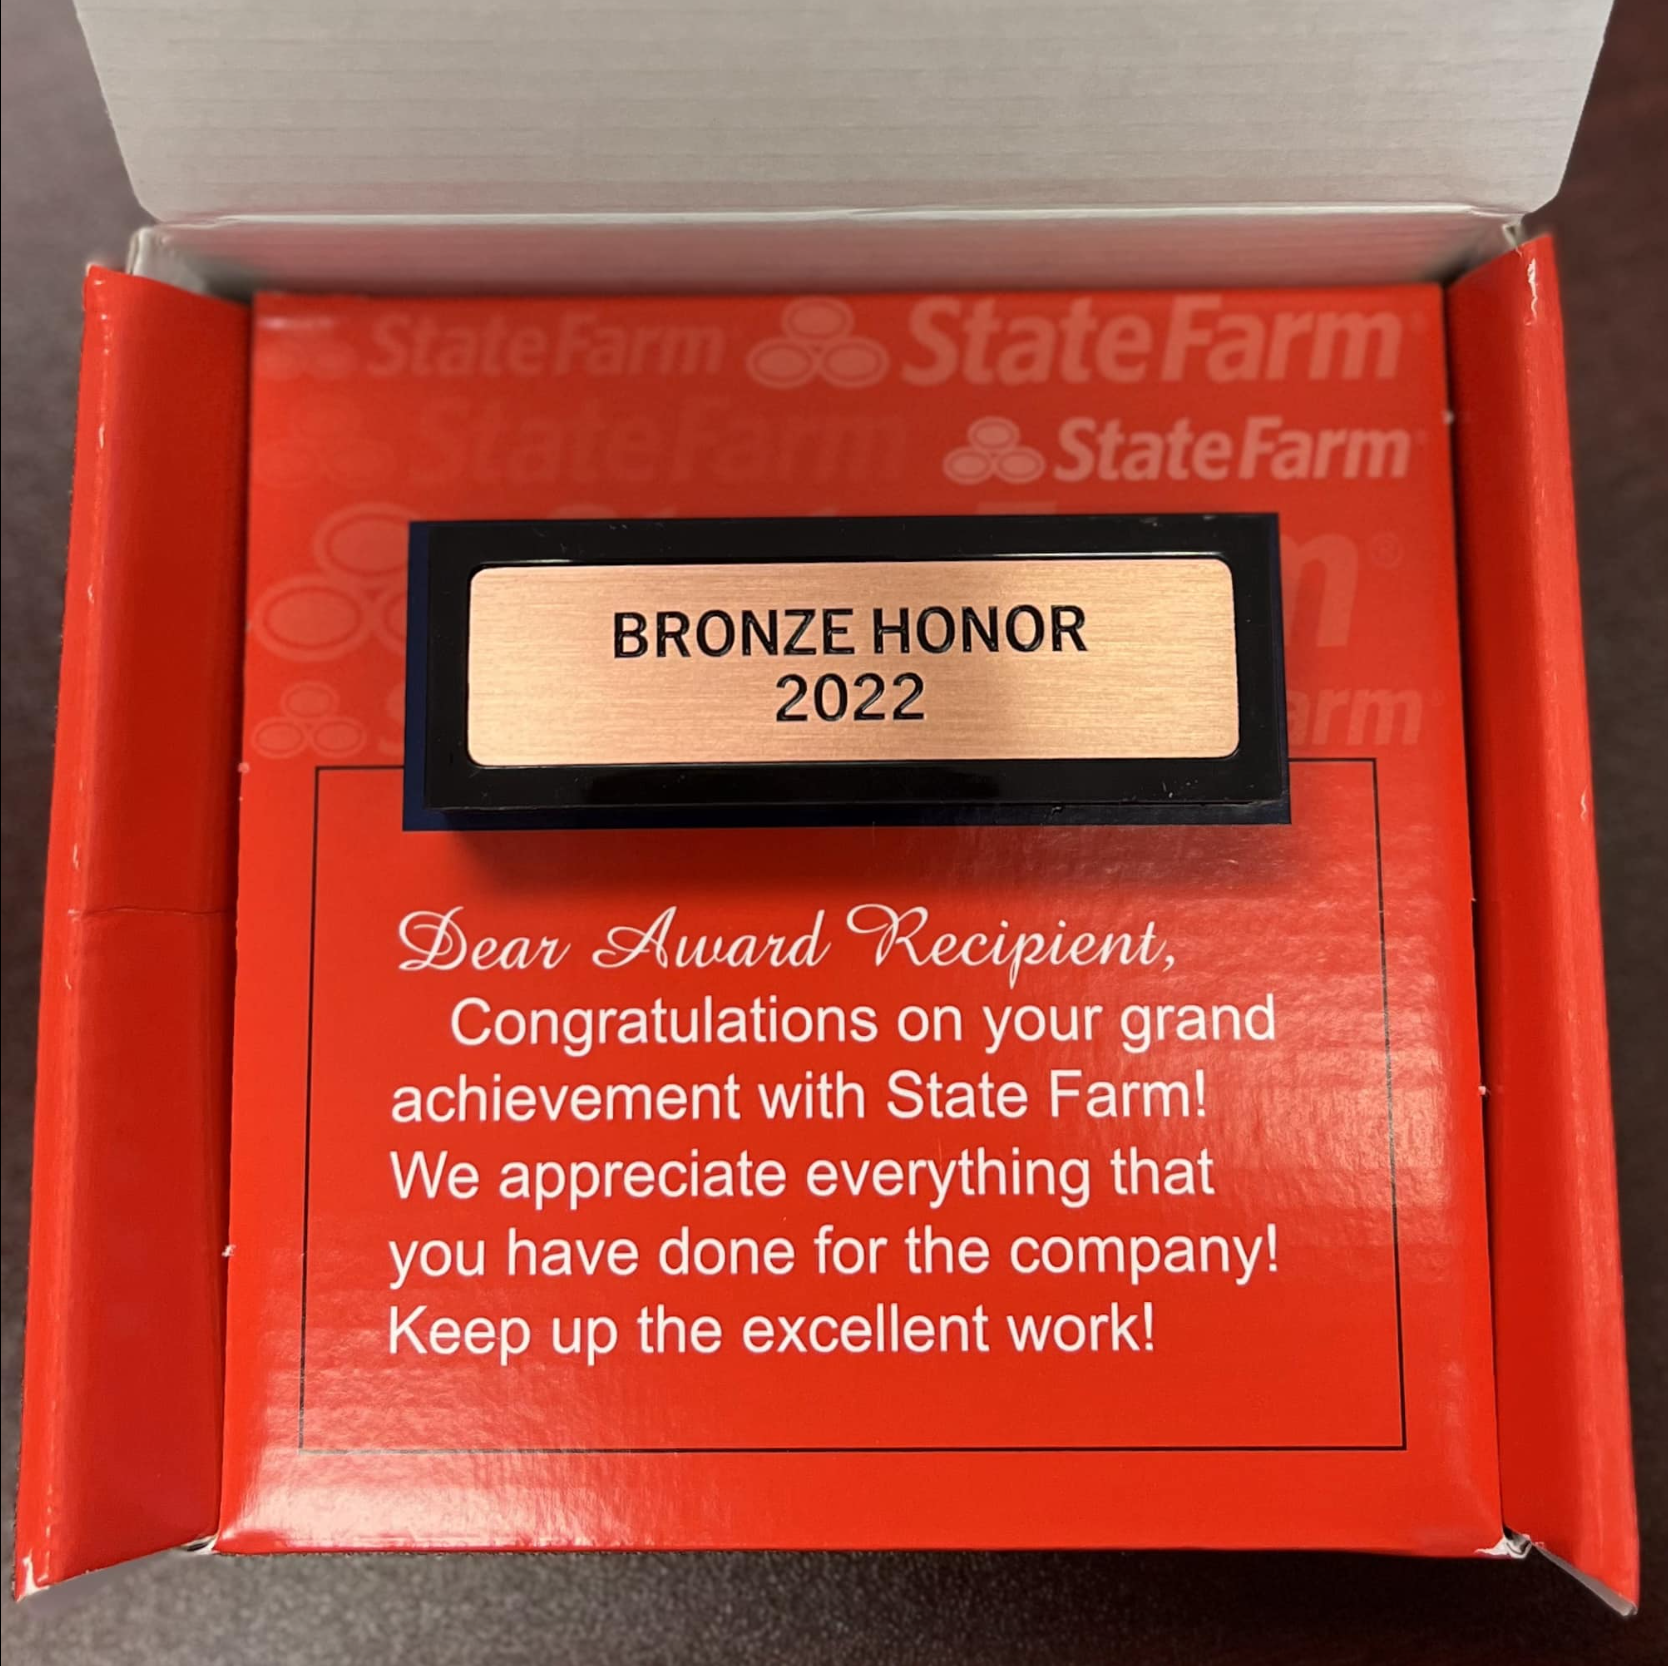 Always honored to receive an award/recognition! We are so thankful for our wonderful customers, as w Mark Pritchard - State Farm Insurance Agent Atlanta (404)856-4950